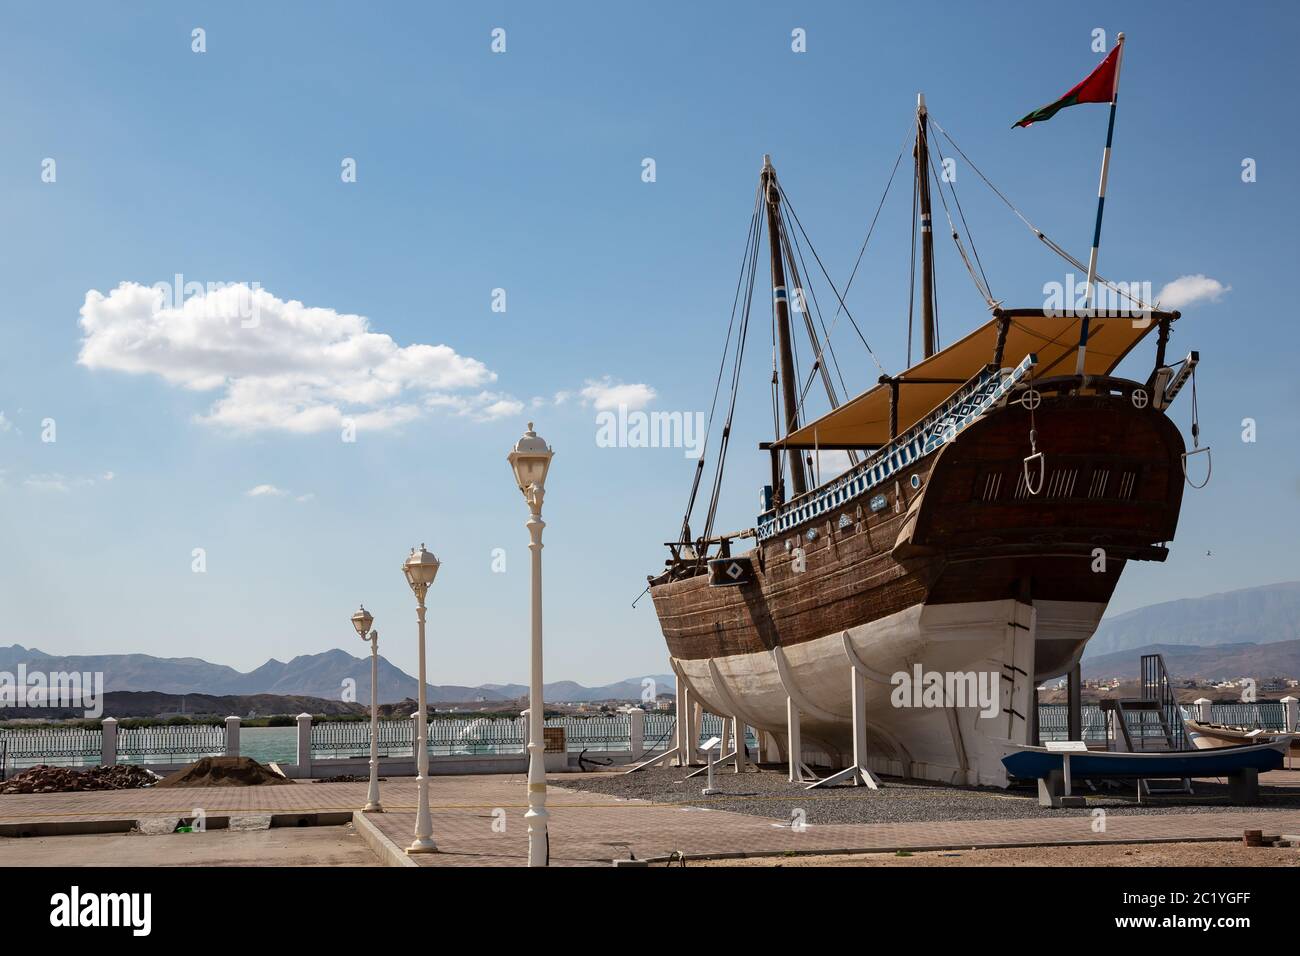 The 300 ton dhow vessel Fatah al Khair on display as an open-air museum in Sur, Oman Stock Photo